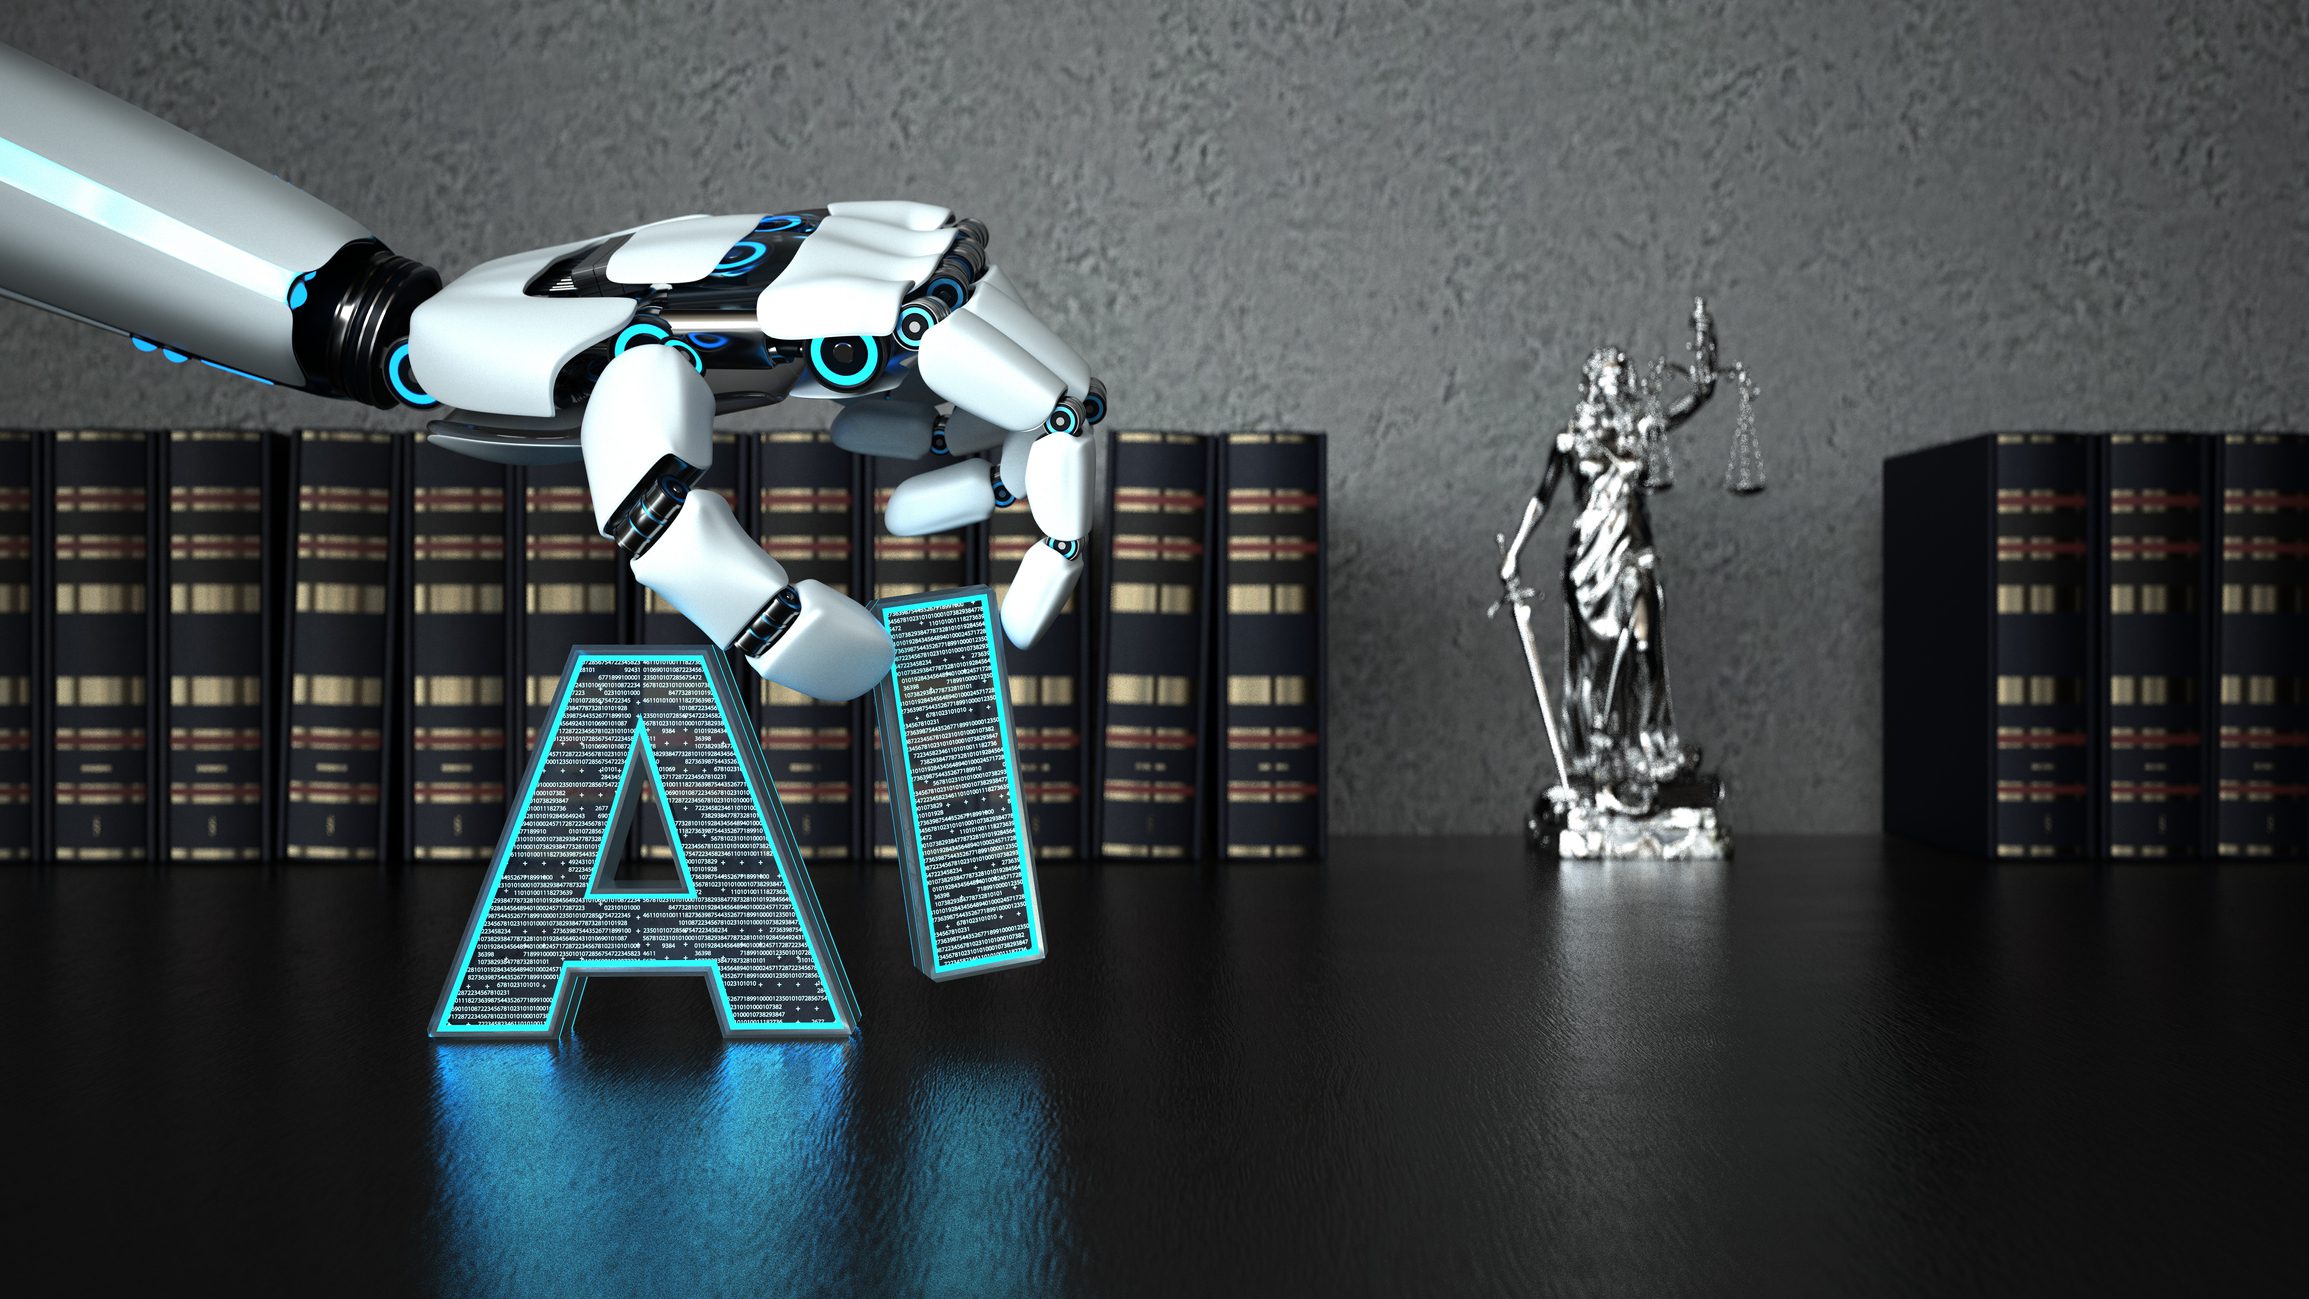 A robot had taking the "I" our of an "AI" on a bookshelf